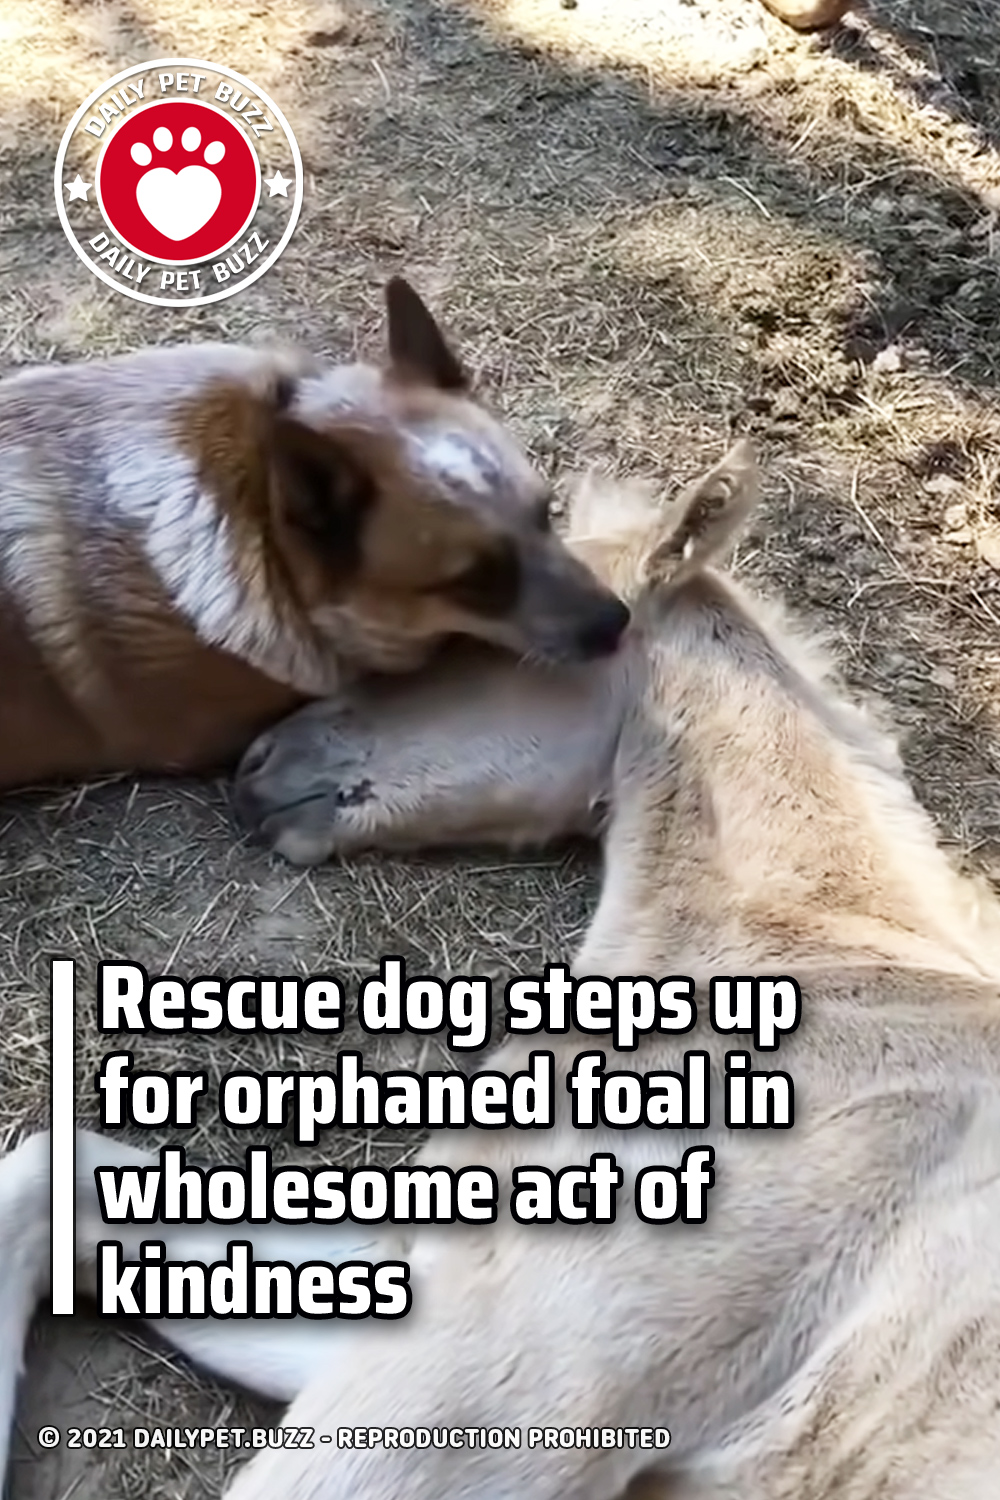 Rescue dog steps up for orphaned foal in wholesome act of kindness